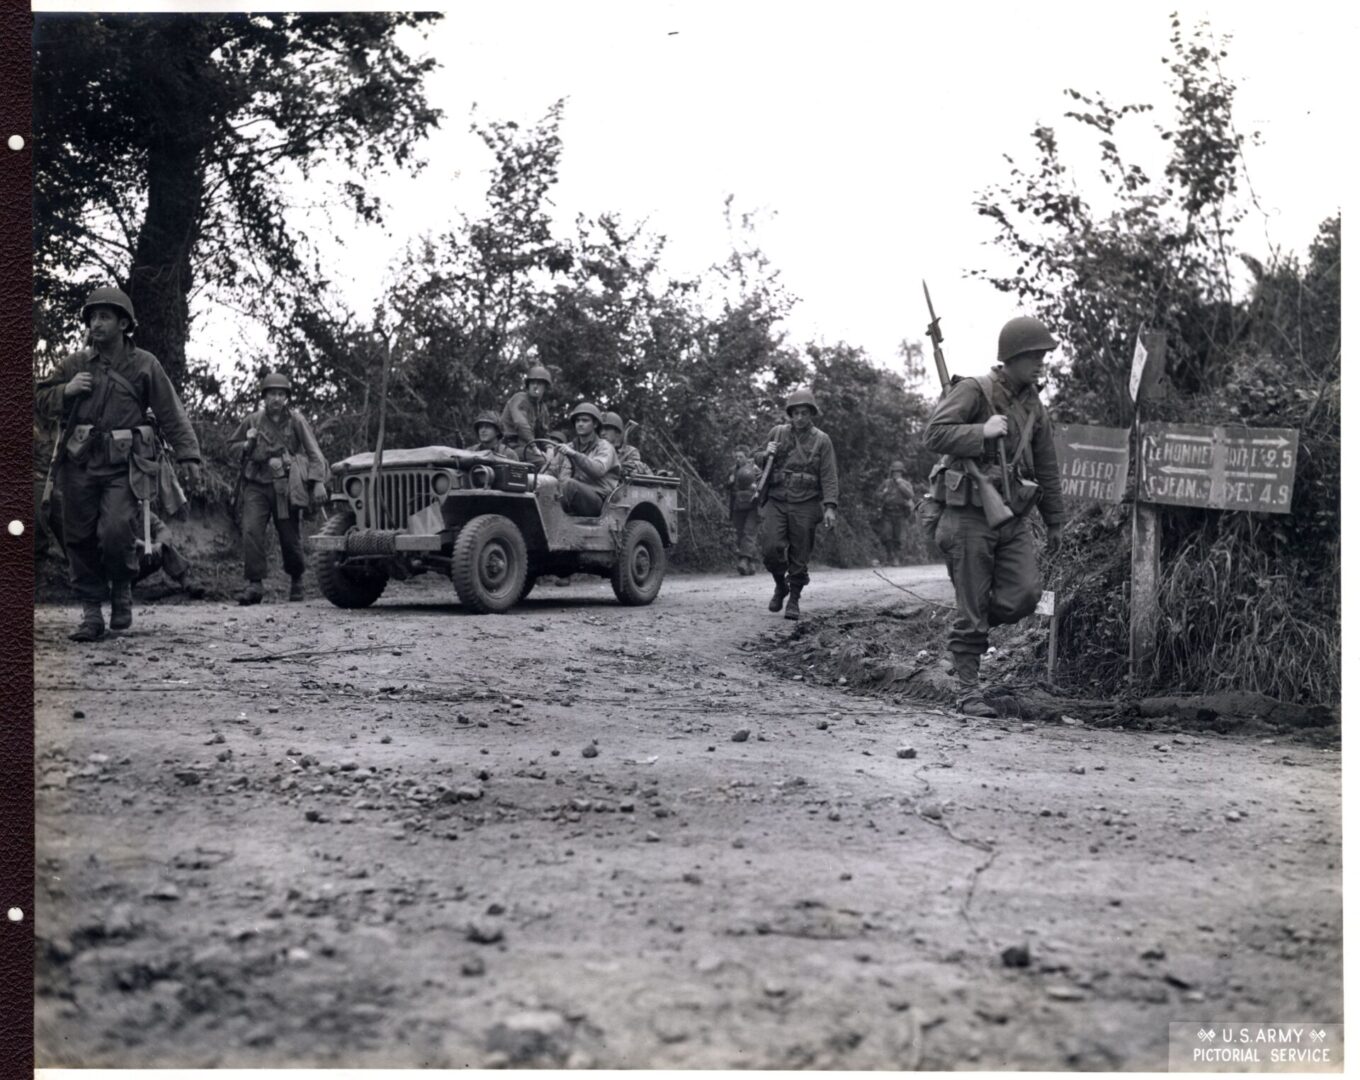 American soldiers take cover under their tank destroyer